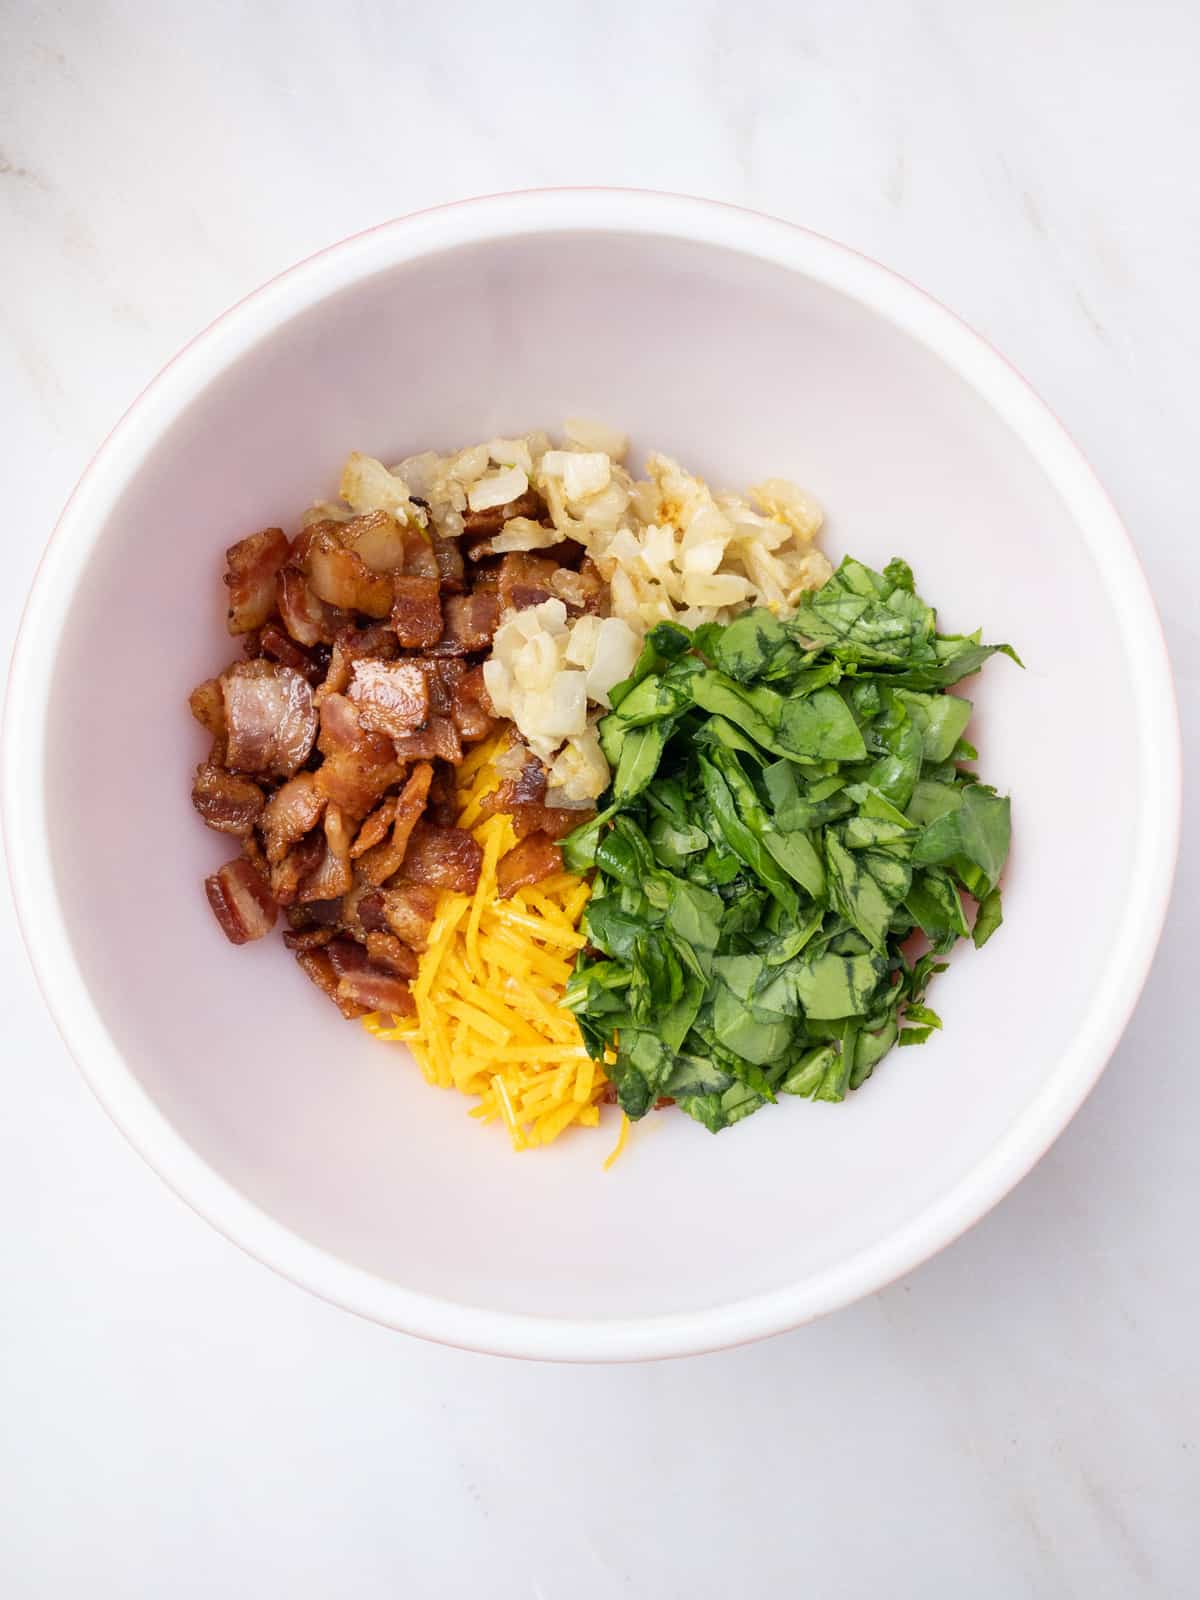 Crispy chopped bacon, dairy-free cheddar cheese shreds, chopped spinach and sautéed onions in a bowl.